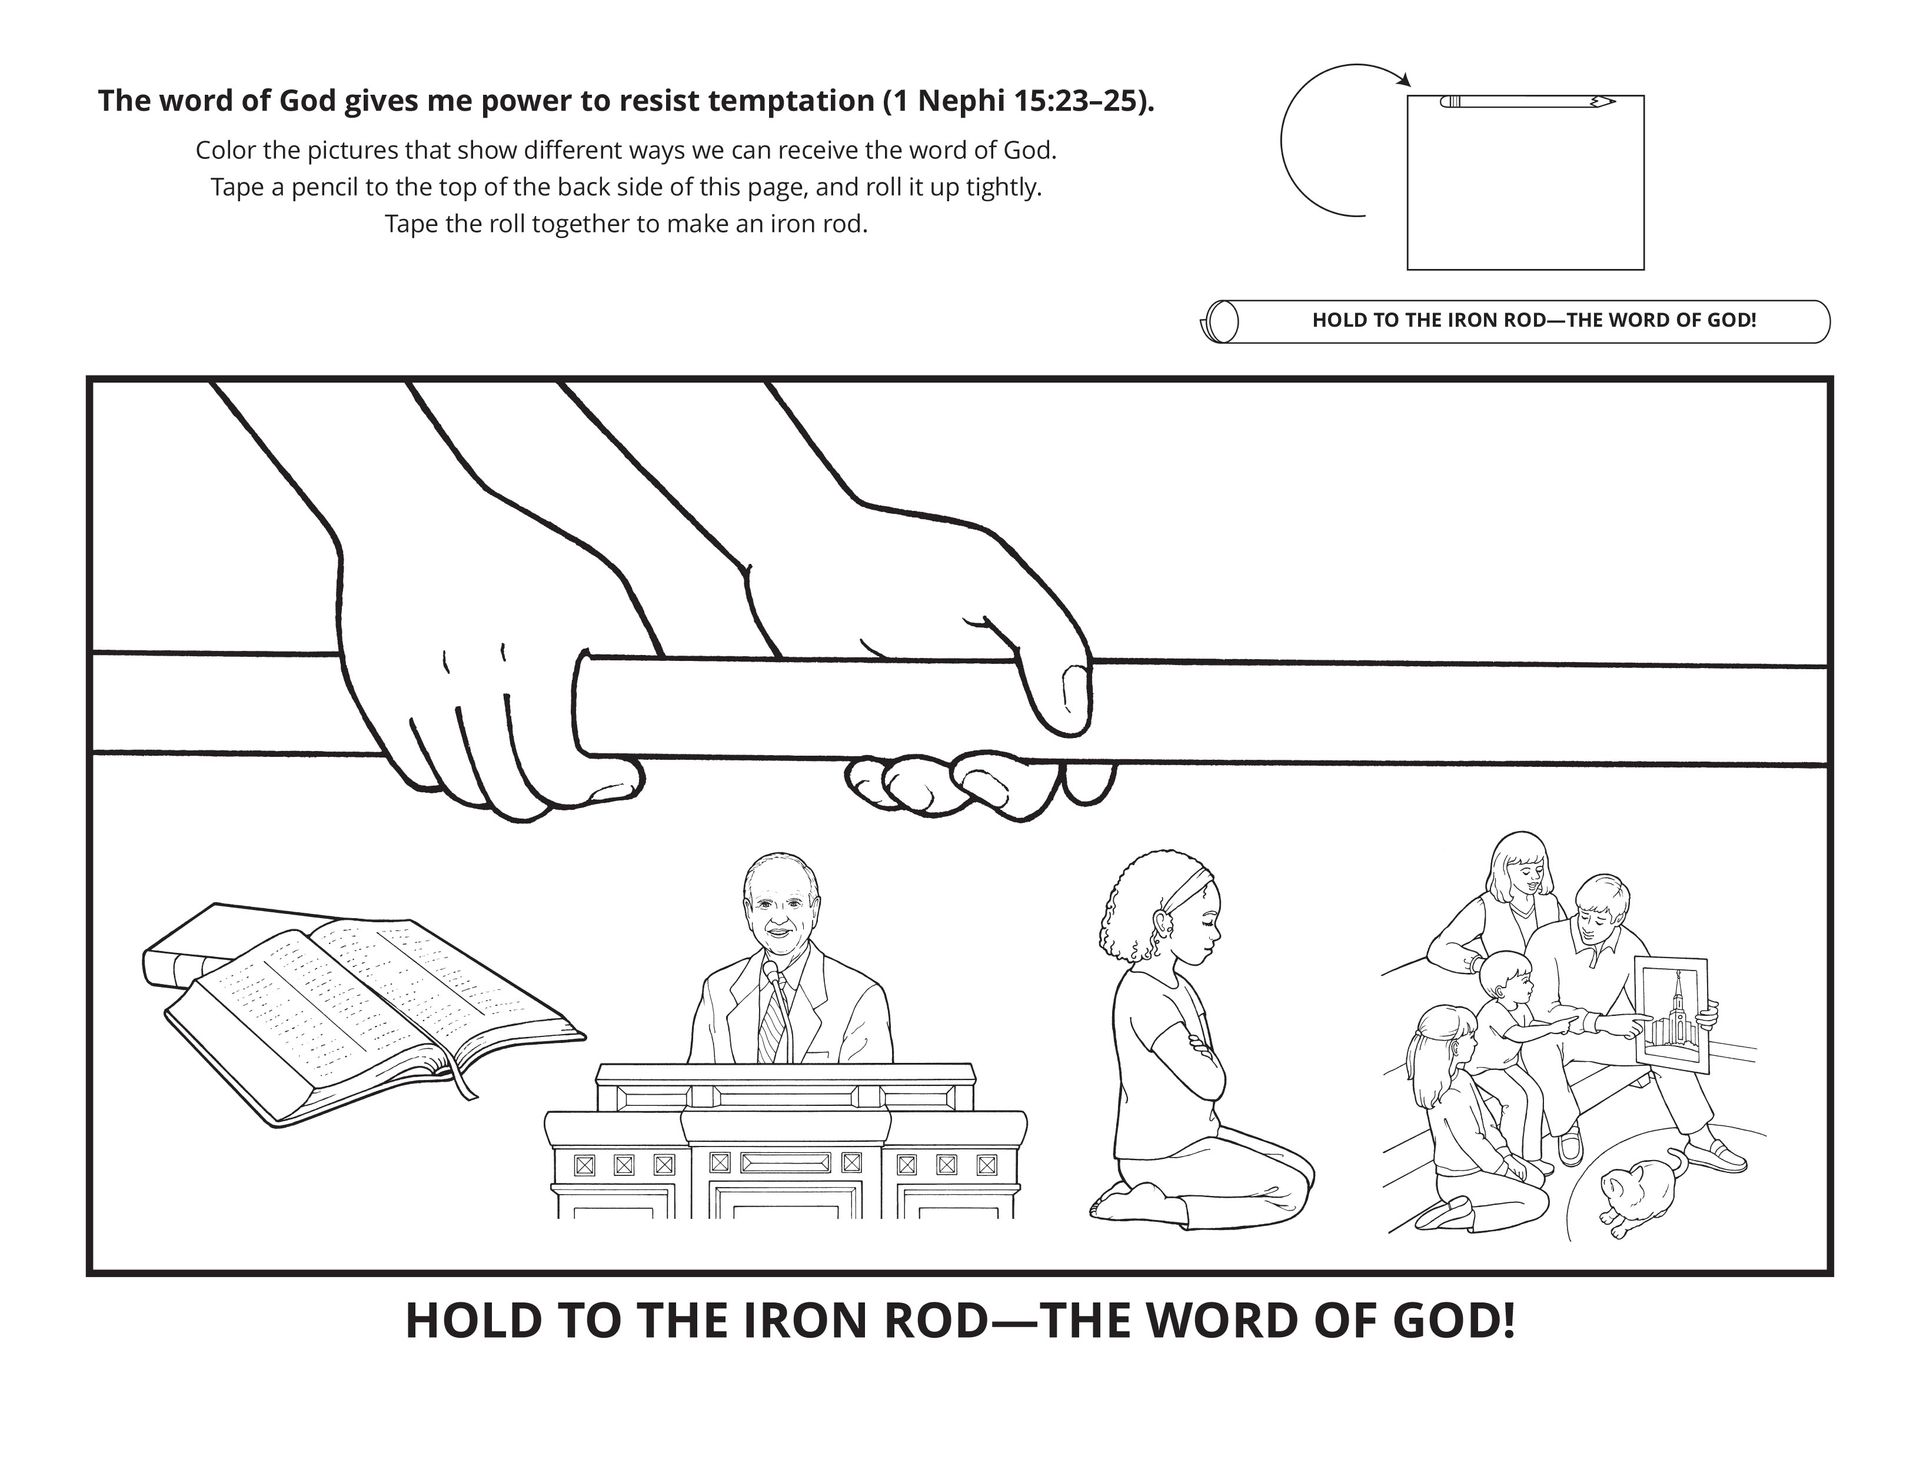 Line art of the iron rod to help students follow the words of God.